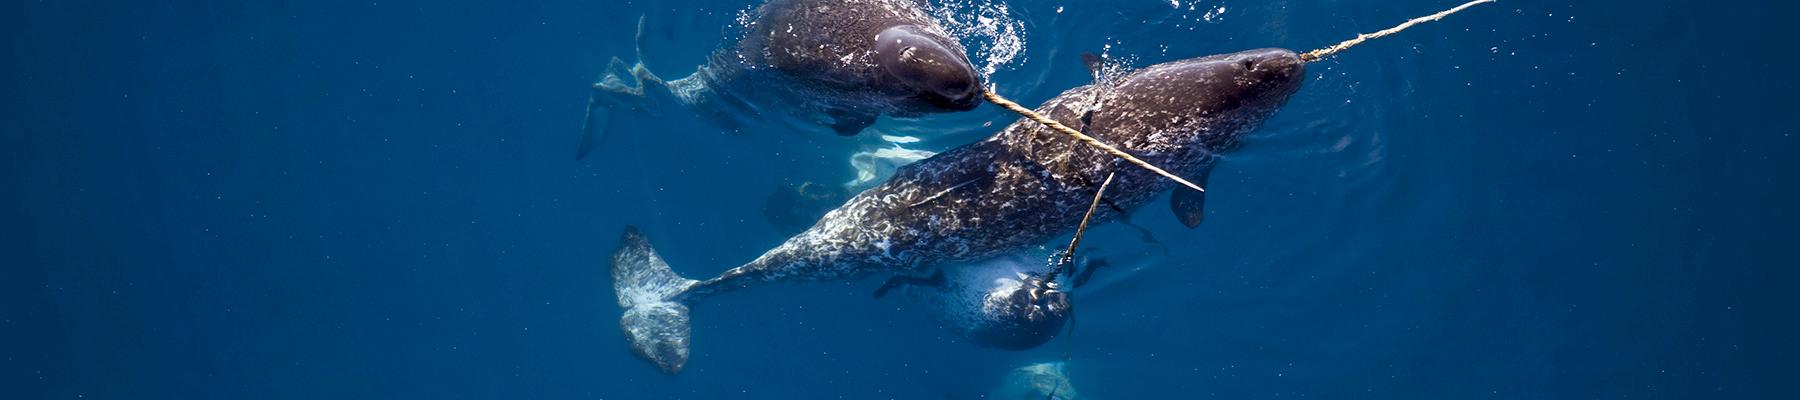 Male narwhals Monodon monoceros caress one another with their tusks in Admiralty Inlet, Nunavut, Canada © Paul Nicklen / National Geographic Creative / WWF-Canada